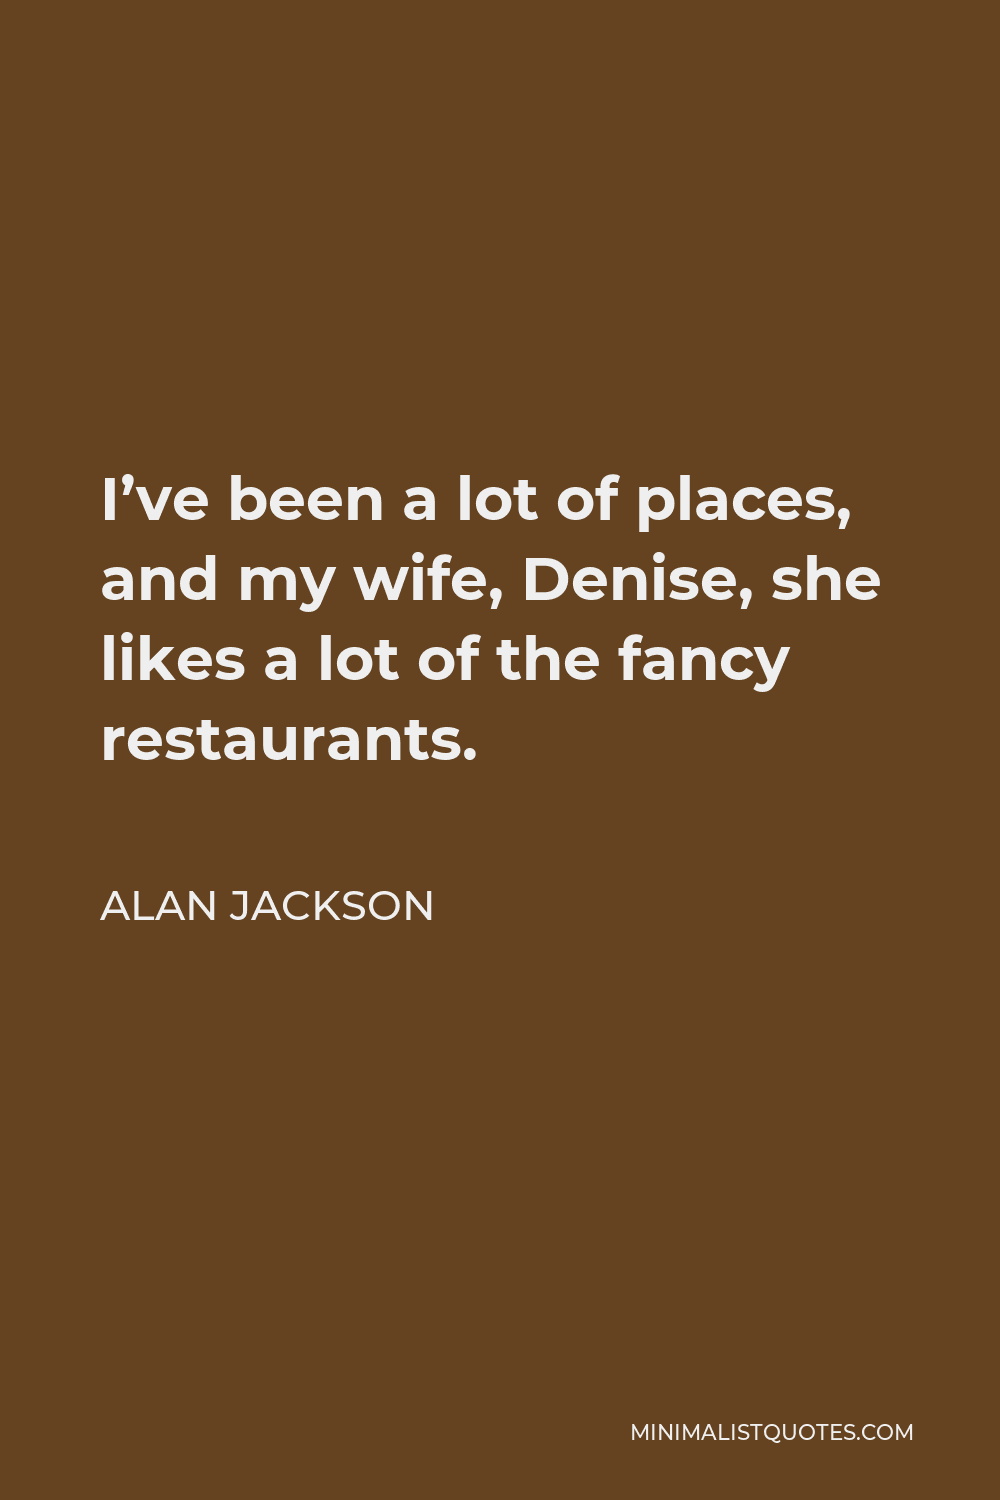 Alan Jackson Quote - I’ve been a lot of places, and my wife, Denise, she likes a lot of the fancy restaurants.